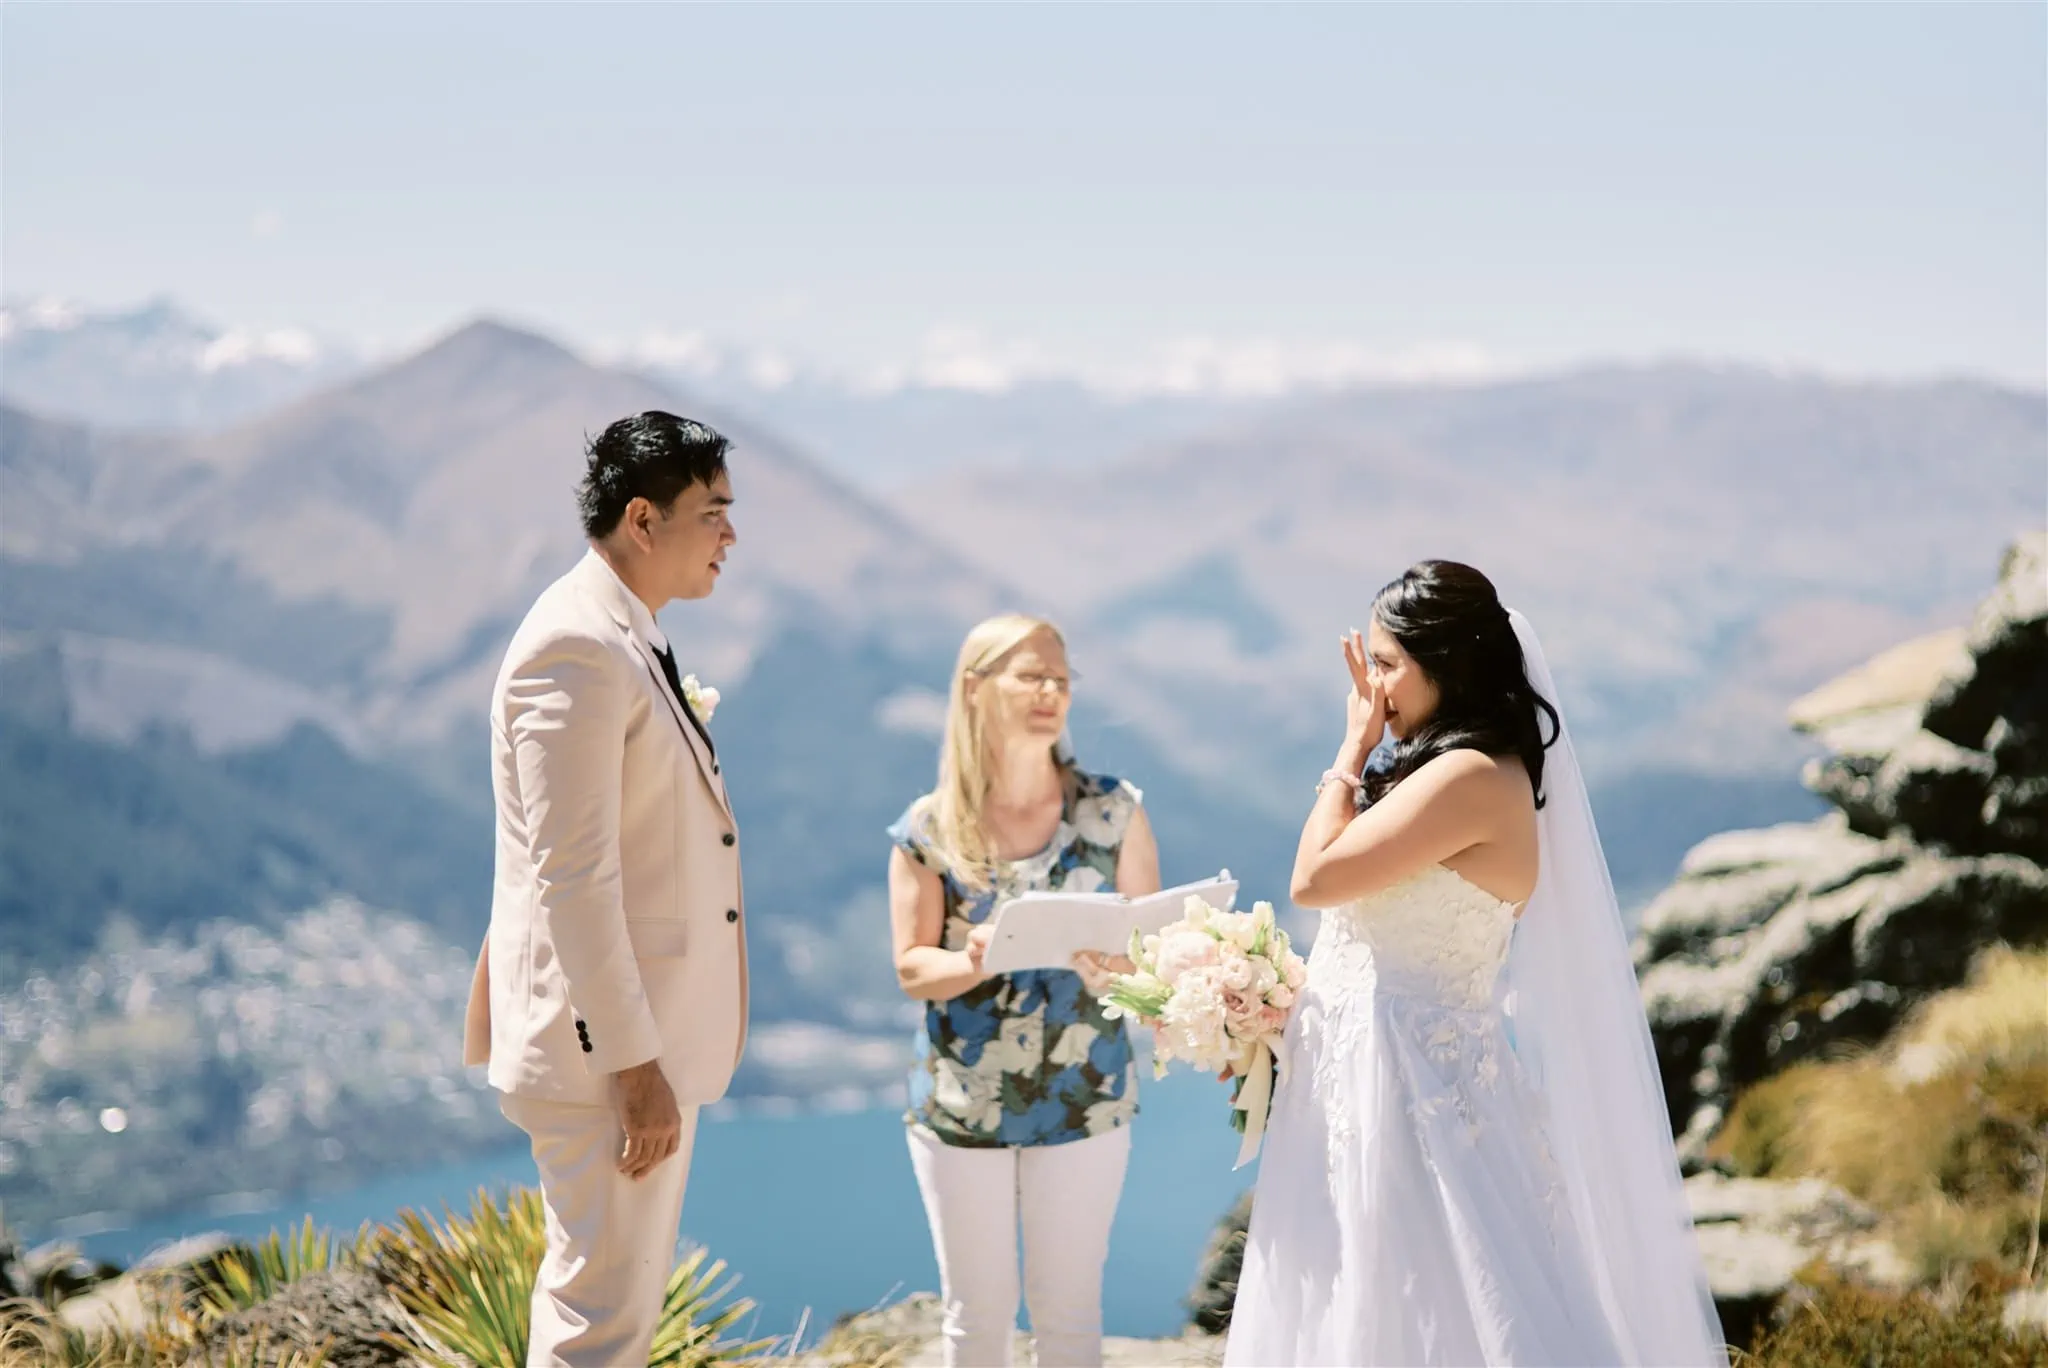 Queenstown Elopement Heli Wedding Photographer クイーンズタウン結婚式 | A man and woman, embraced in love, standing on a cliff overlooking the majestic Queenstown mountains during their intimate elopement ceremony.